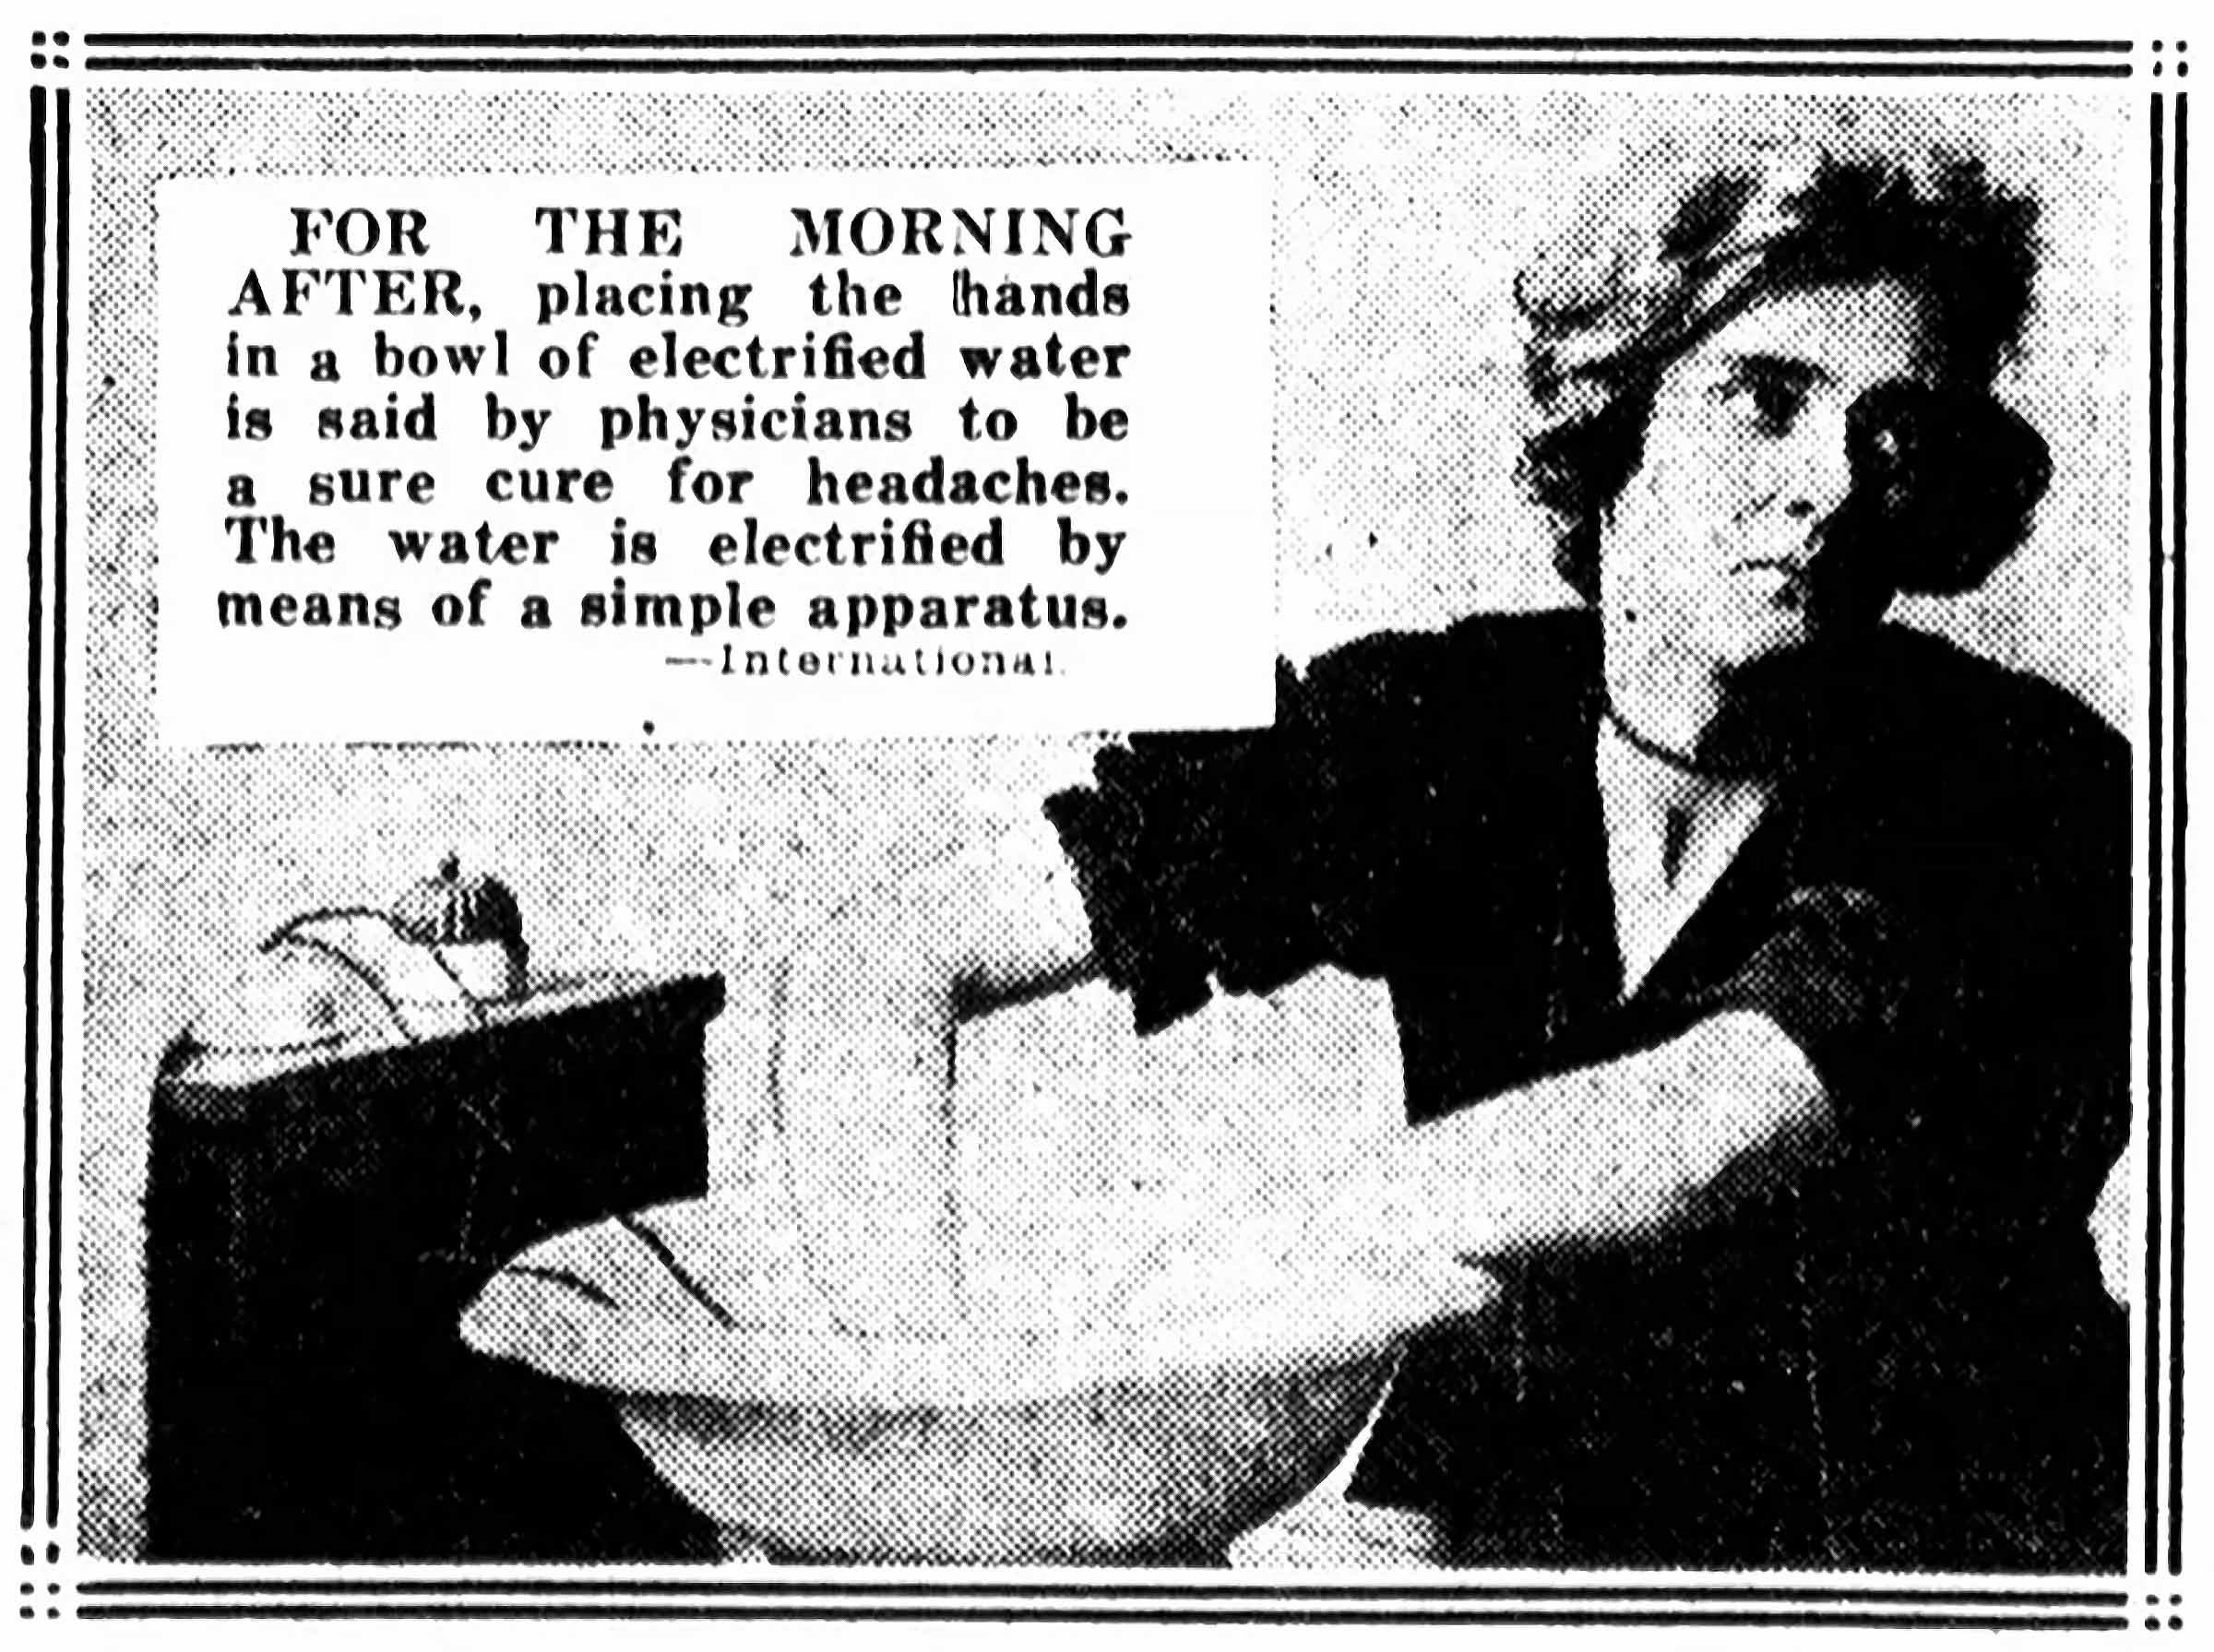 An ad from 1922 for electrified water. A woman holds her hands in a bowl of water that's connected to a contraption. The ad says, For the morning after, placing the hands in a bowl of electrified water is said by physicians to be a sure cure for headaches. The water is electrified by means of a simple apparatus.